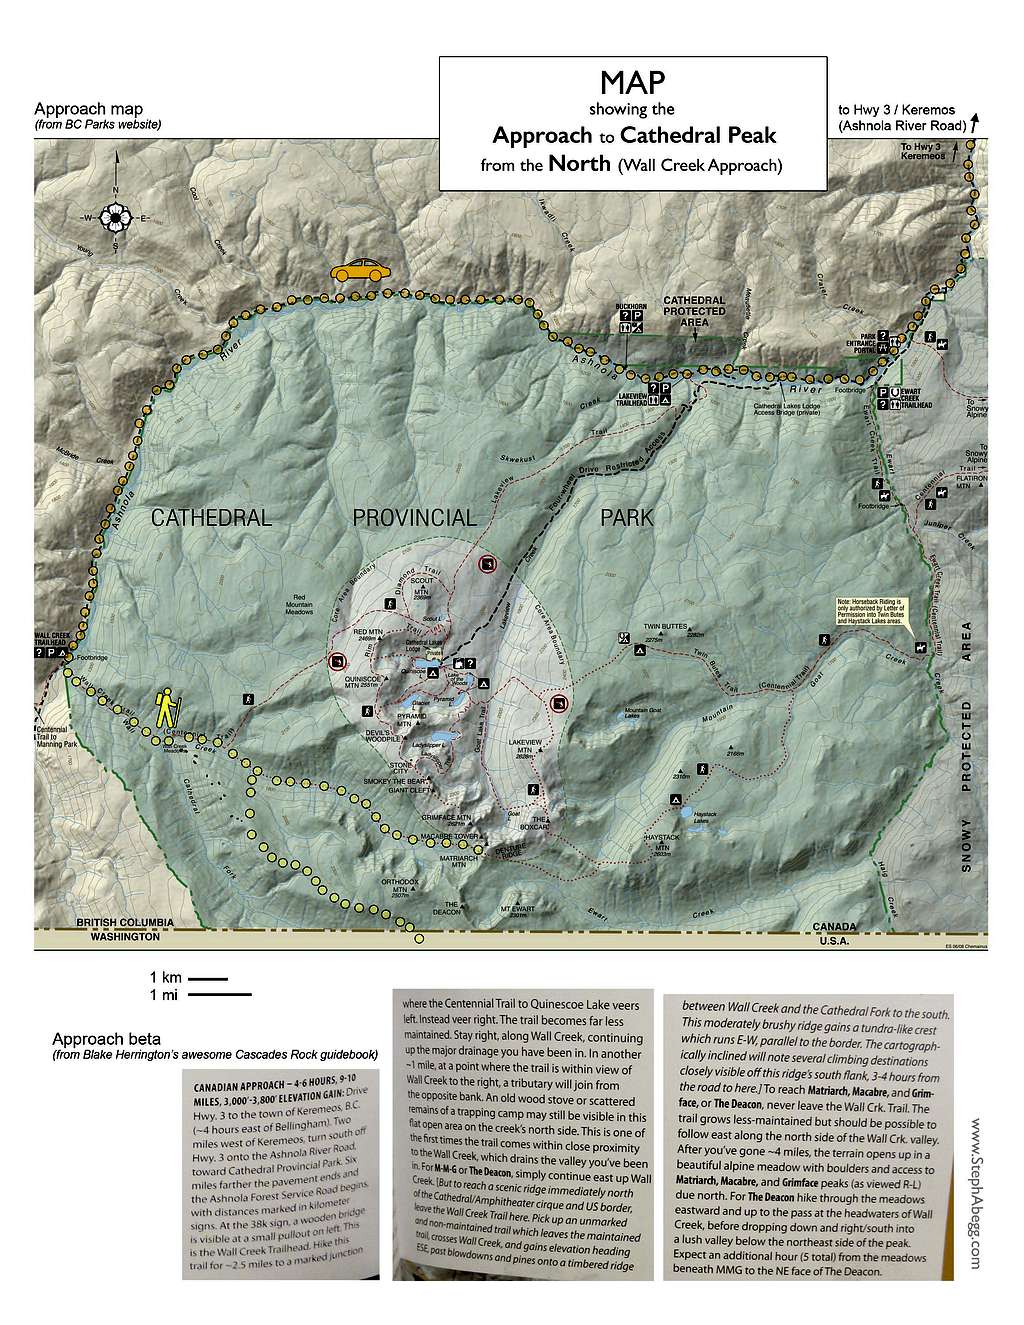 Map showing approach to Cathedral Peak from the north (Canadian approach)